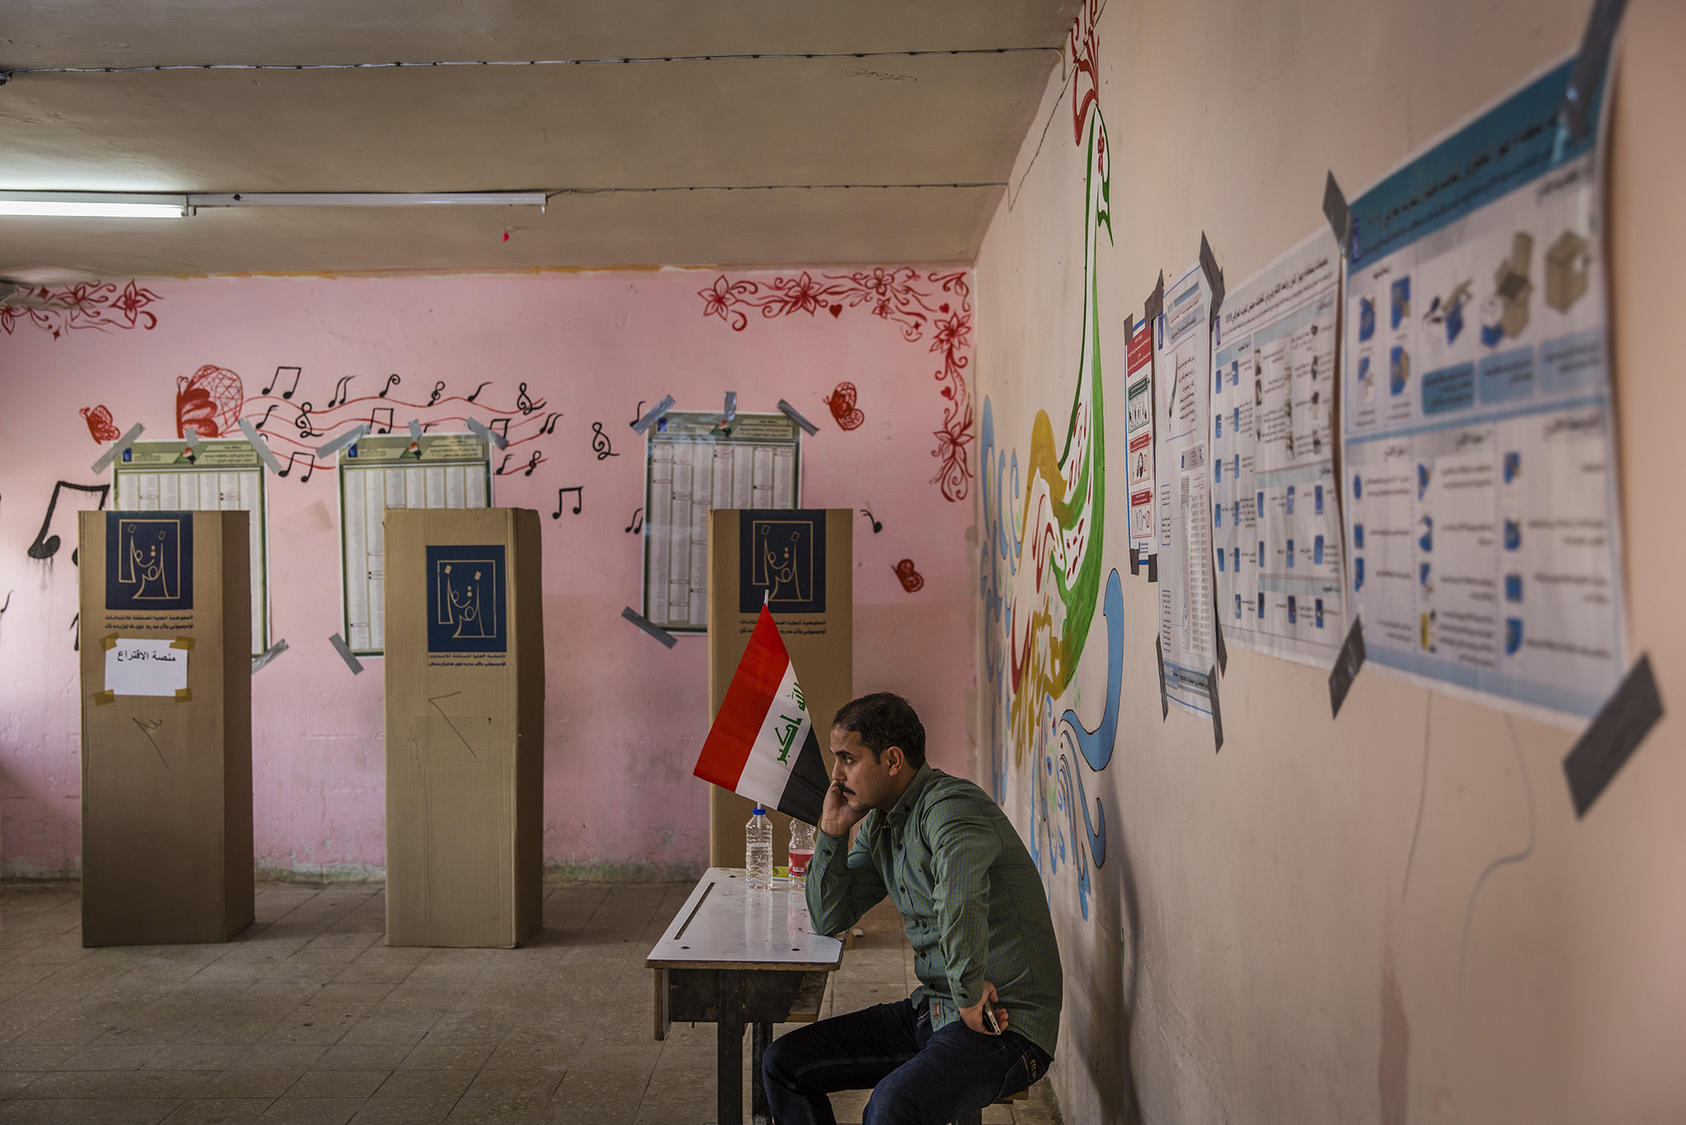 A man on duty at a polling place in Baghdad for Iraq's national elections. May 12, 2018. (Ivor Prickett/The New York Times)